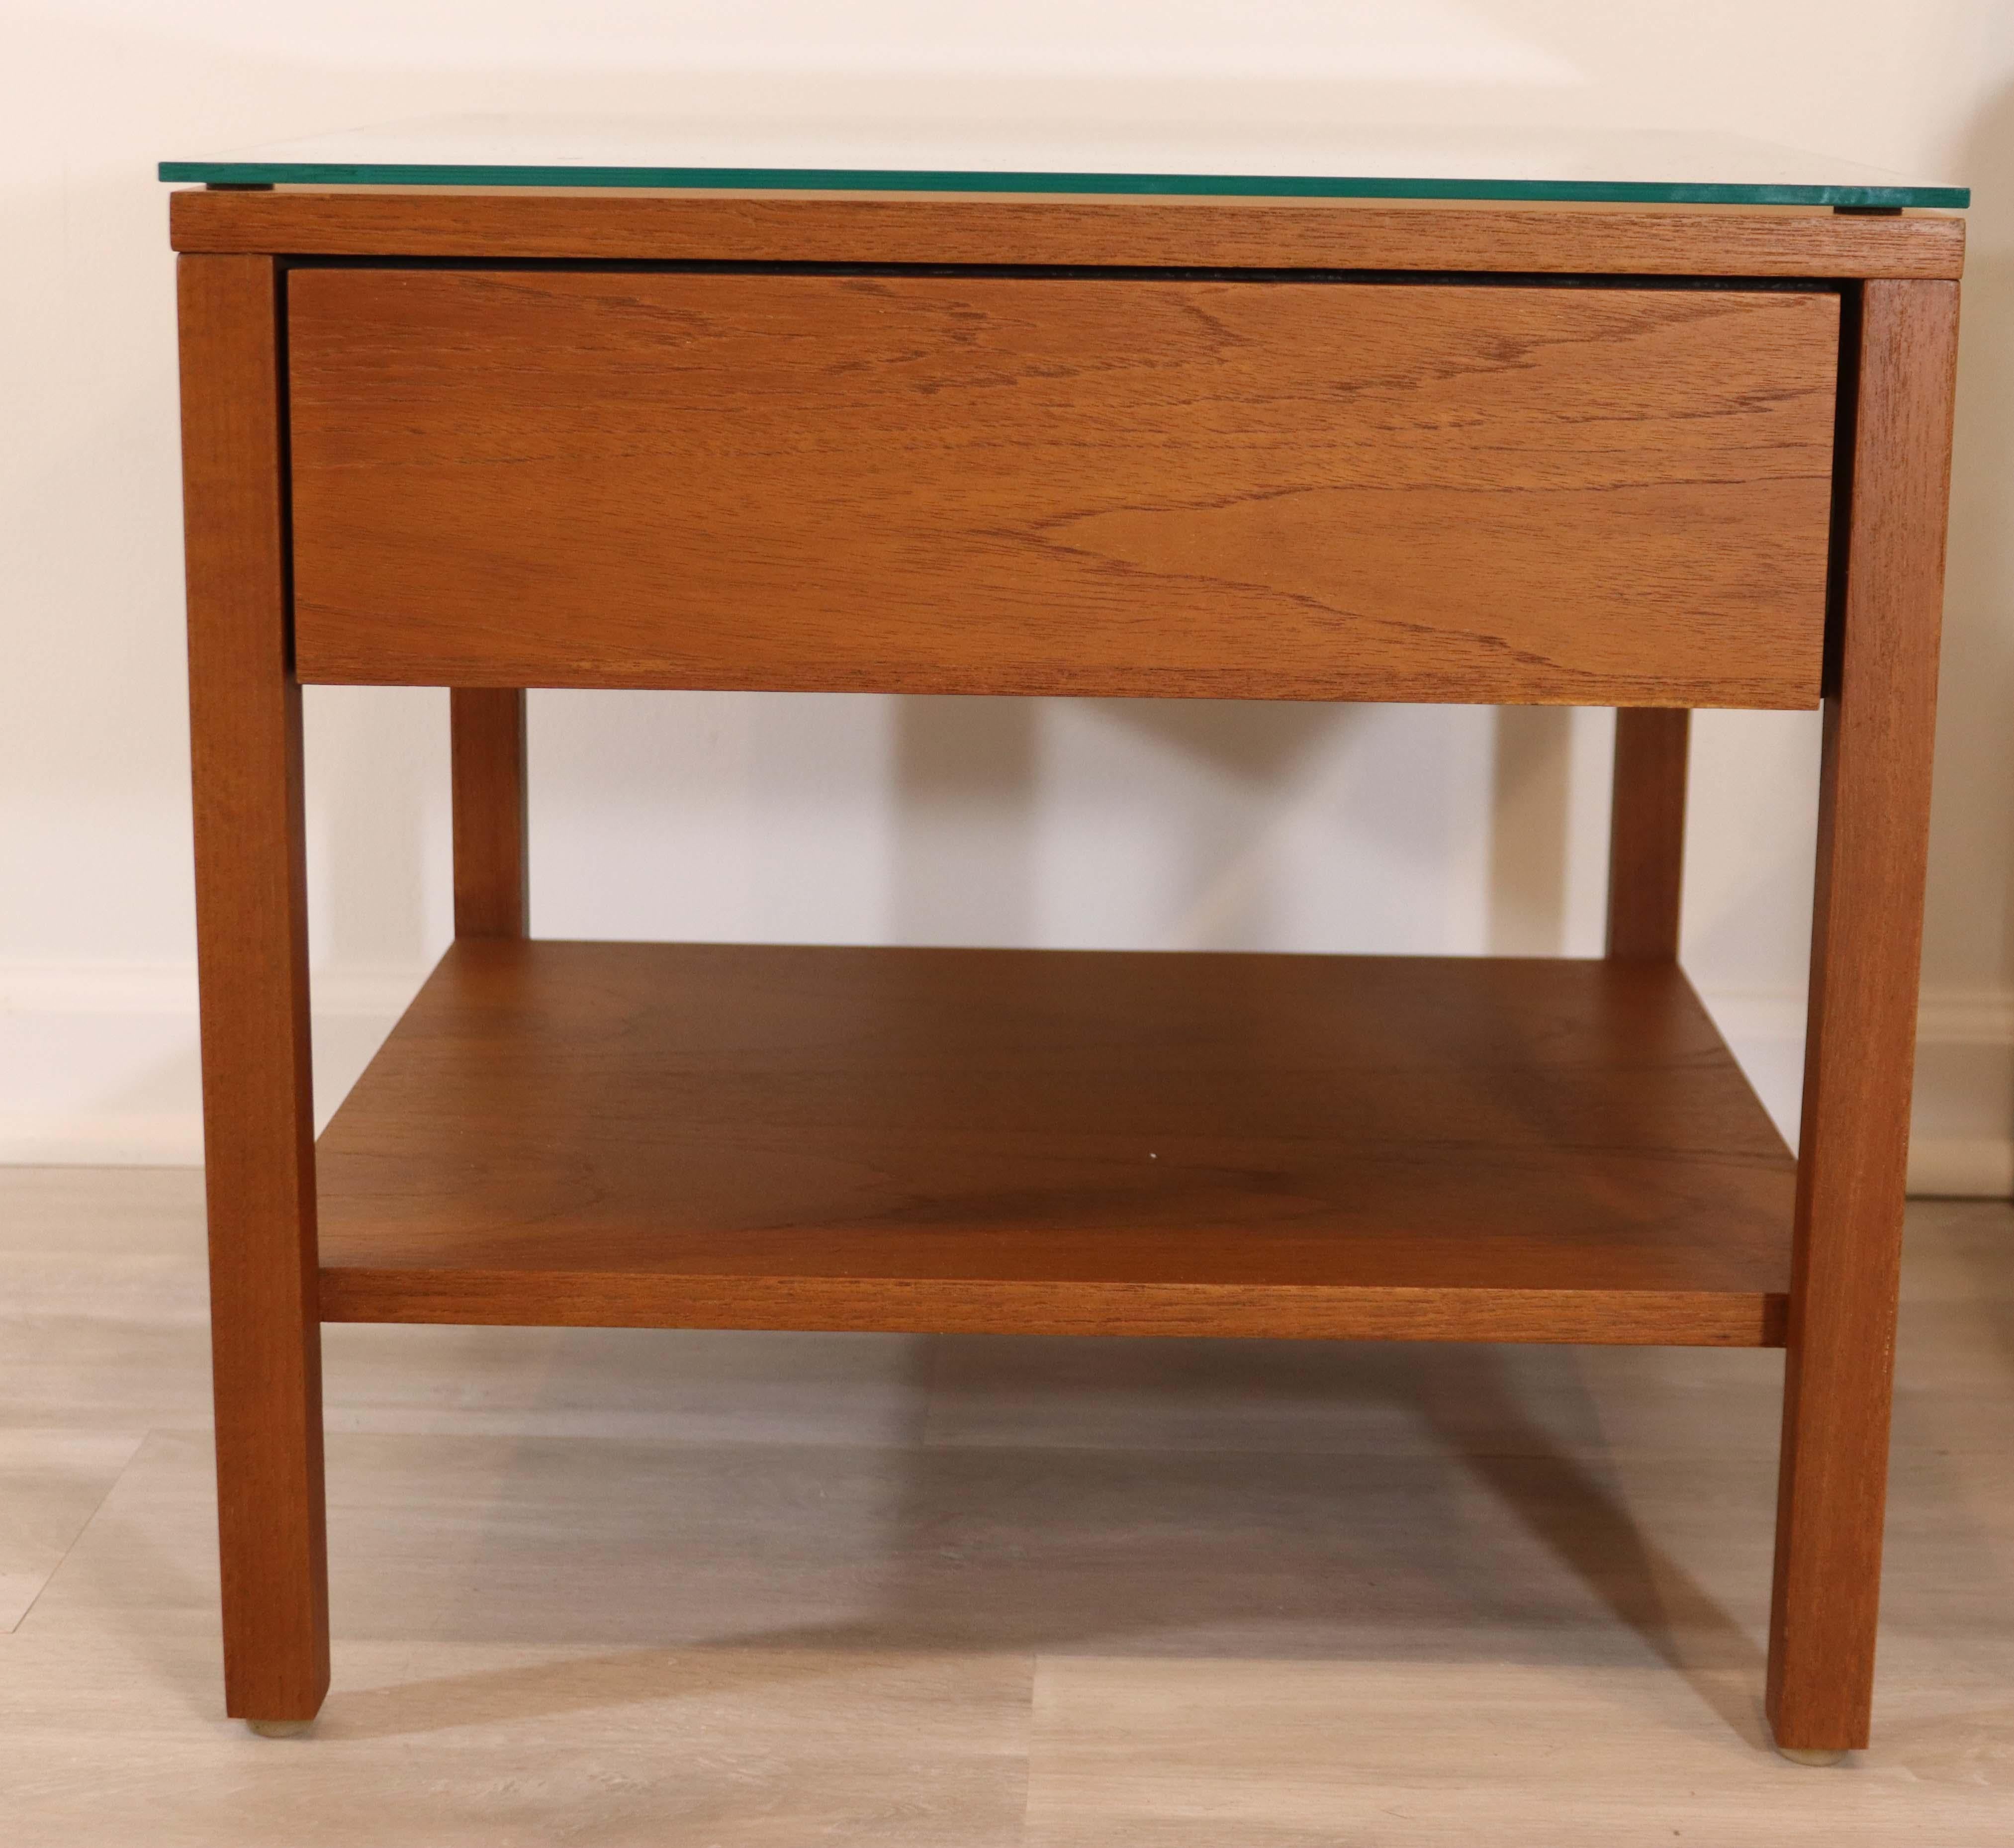 This early pair of walnut nightstands or side tables by Florence Knoll, circa 1950's are in excellent condition. The warm walnut wood was professionally restored in 2016 and includes a single drawer and glass top.

Dimensions: 19.5 L x 19.5 W x